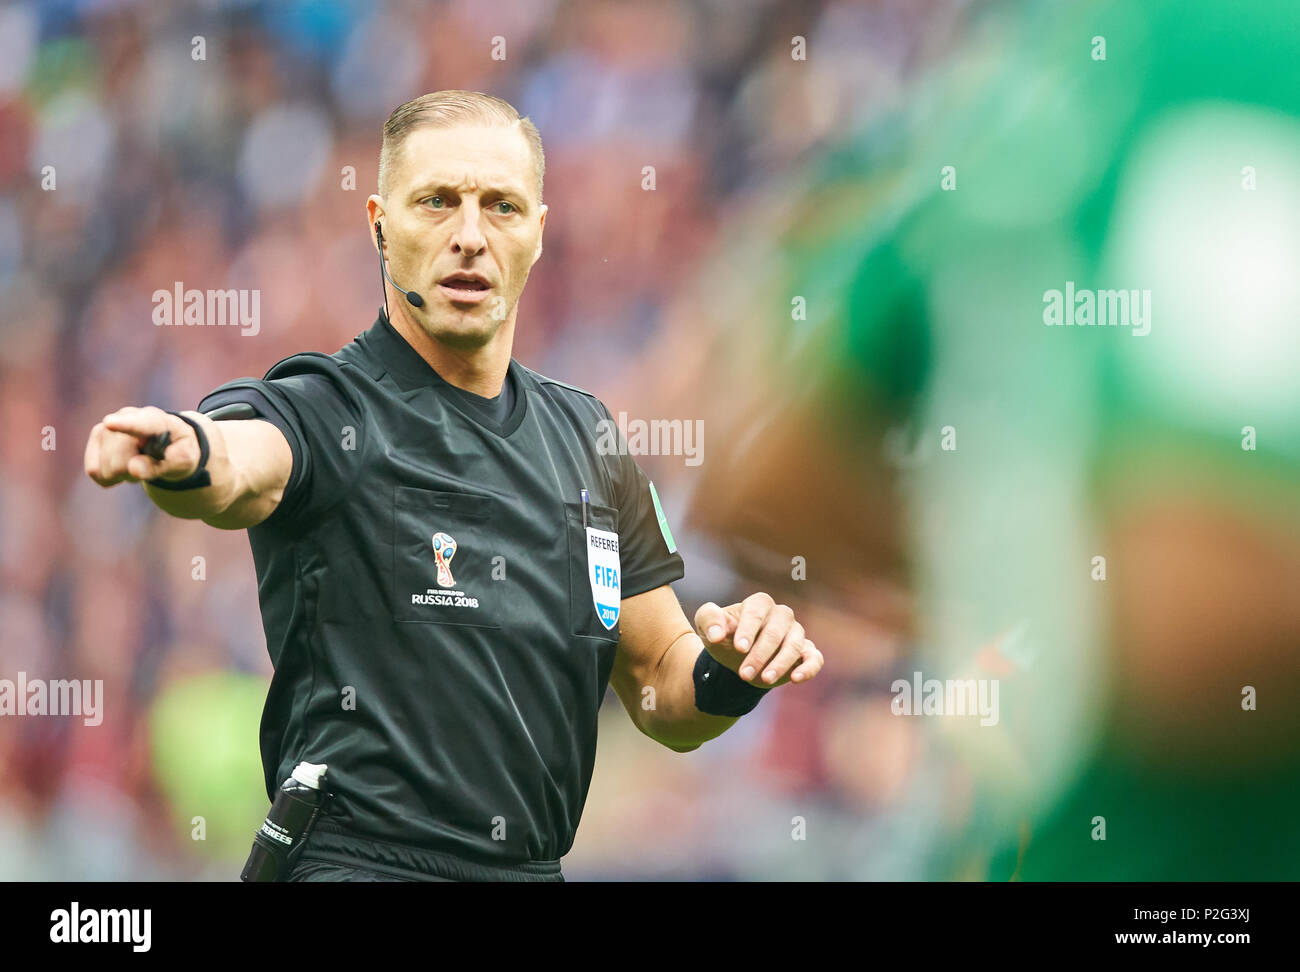 Moscow, Russia- Saudi Arabia, Soccer, Moscow, June 14, 2018 Referee Nestor PITANA, ARG with whistle, gestures, shows, referee, individual action RUSSIA - SAUDI ARABIA 5-0 FIFA WORLD CUP 2018 RUSSIA opening match, Season 2018/2019,  June 14, 2018 Luzhniki Stadium in Moscow, Russia. © Peter Schatz / Alamy Live News Stock Photo